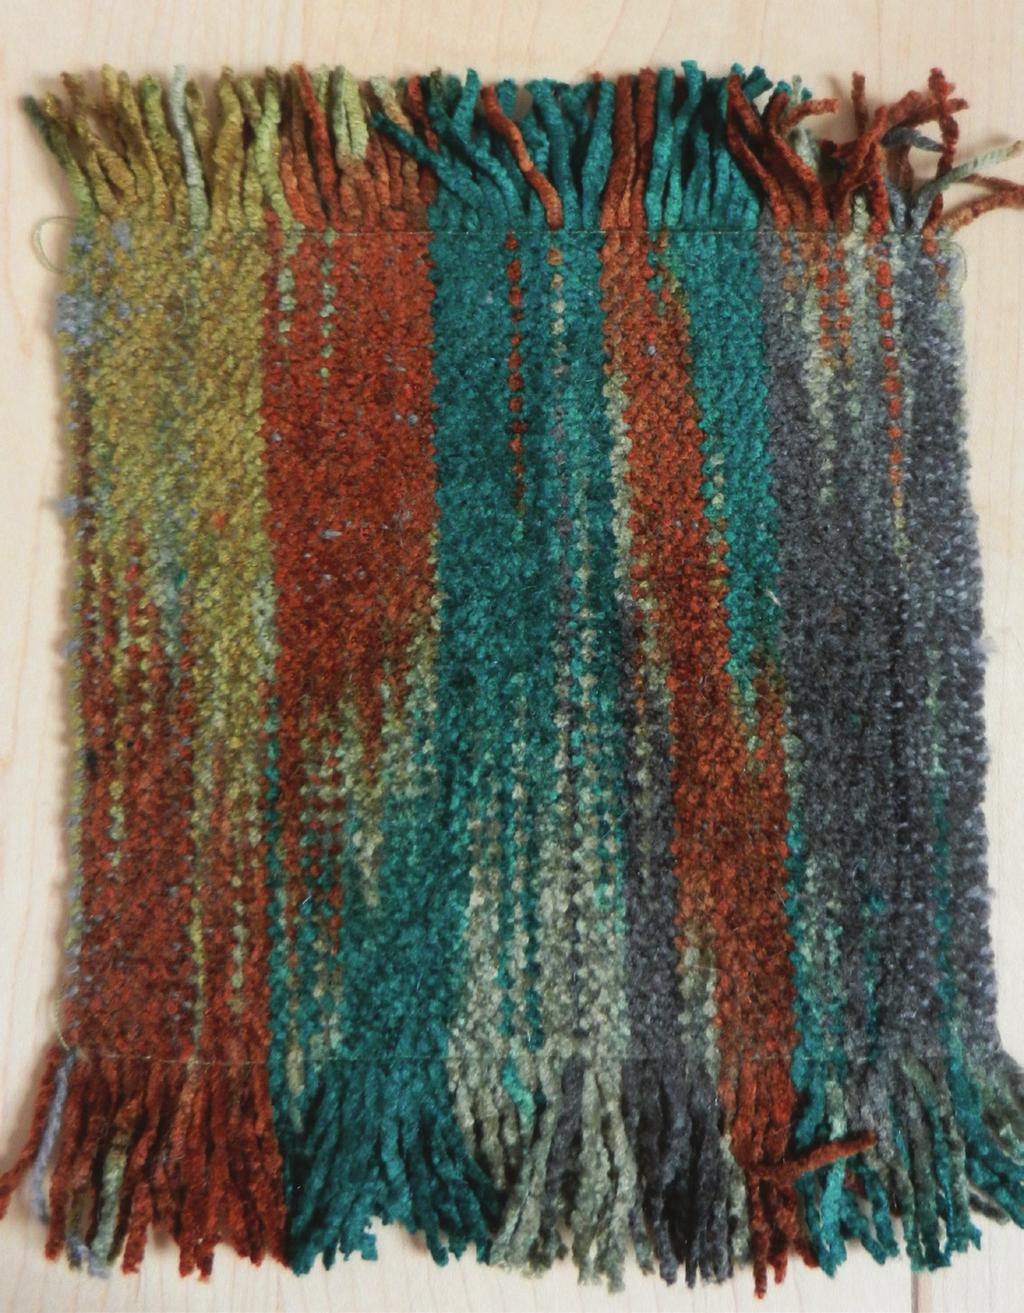 Loom #3 FALSE IKAT Fiber: Rayon Chenille EPI: 20 Width: 5 Total number of ends: 100 Reed Size: 12 dent Refer to Bonnie Tarses YouTube video for instructions on winding your warp https://youtu.